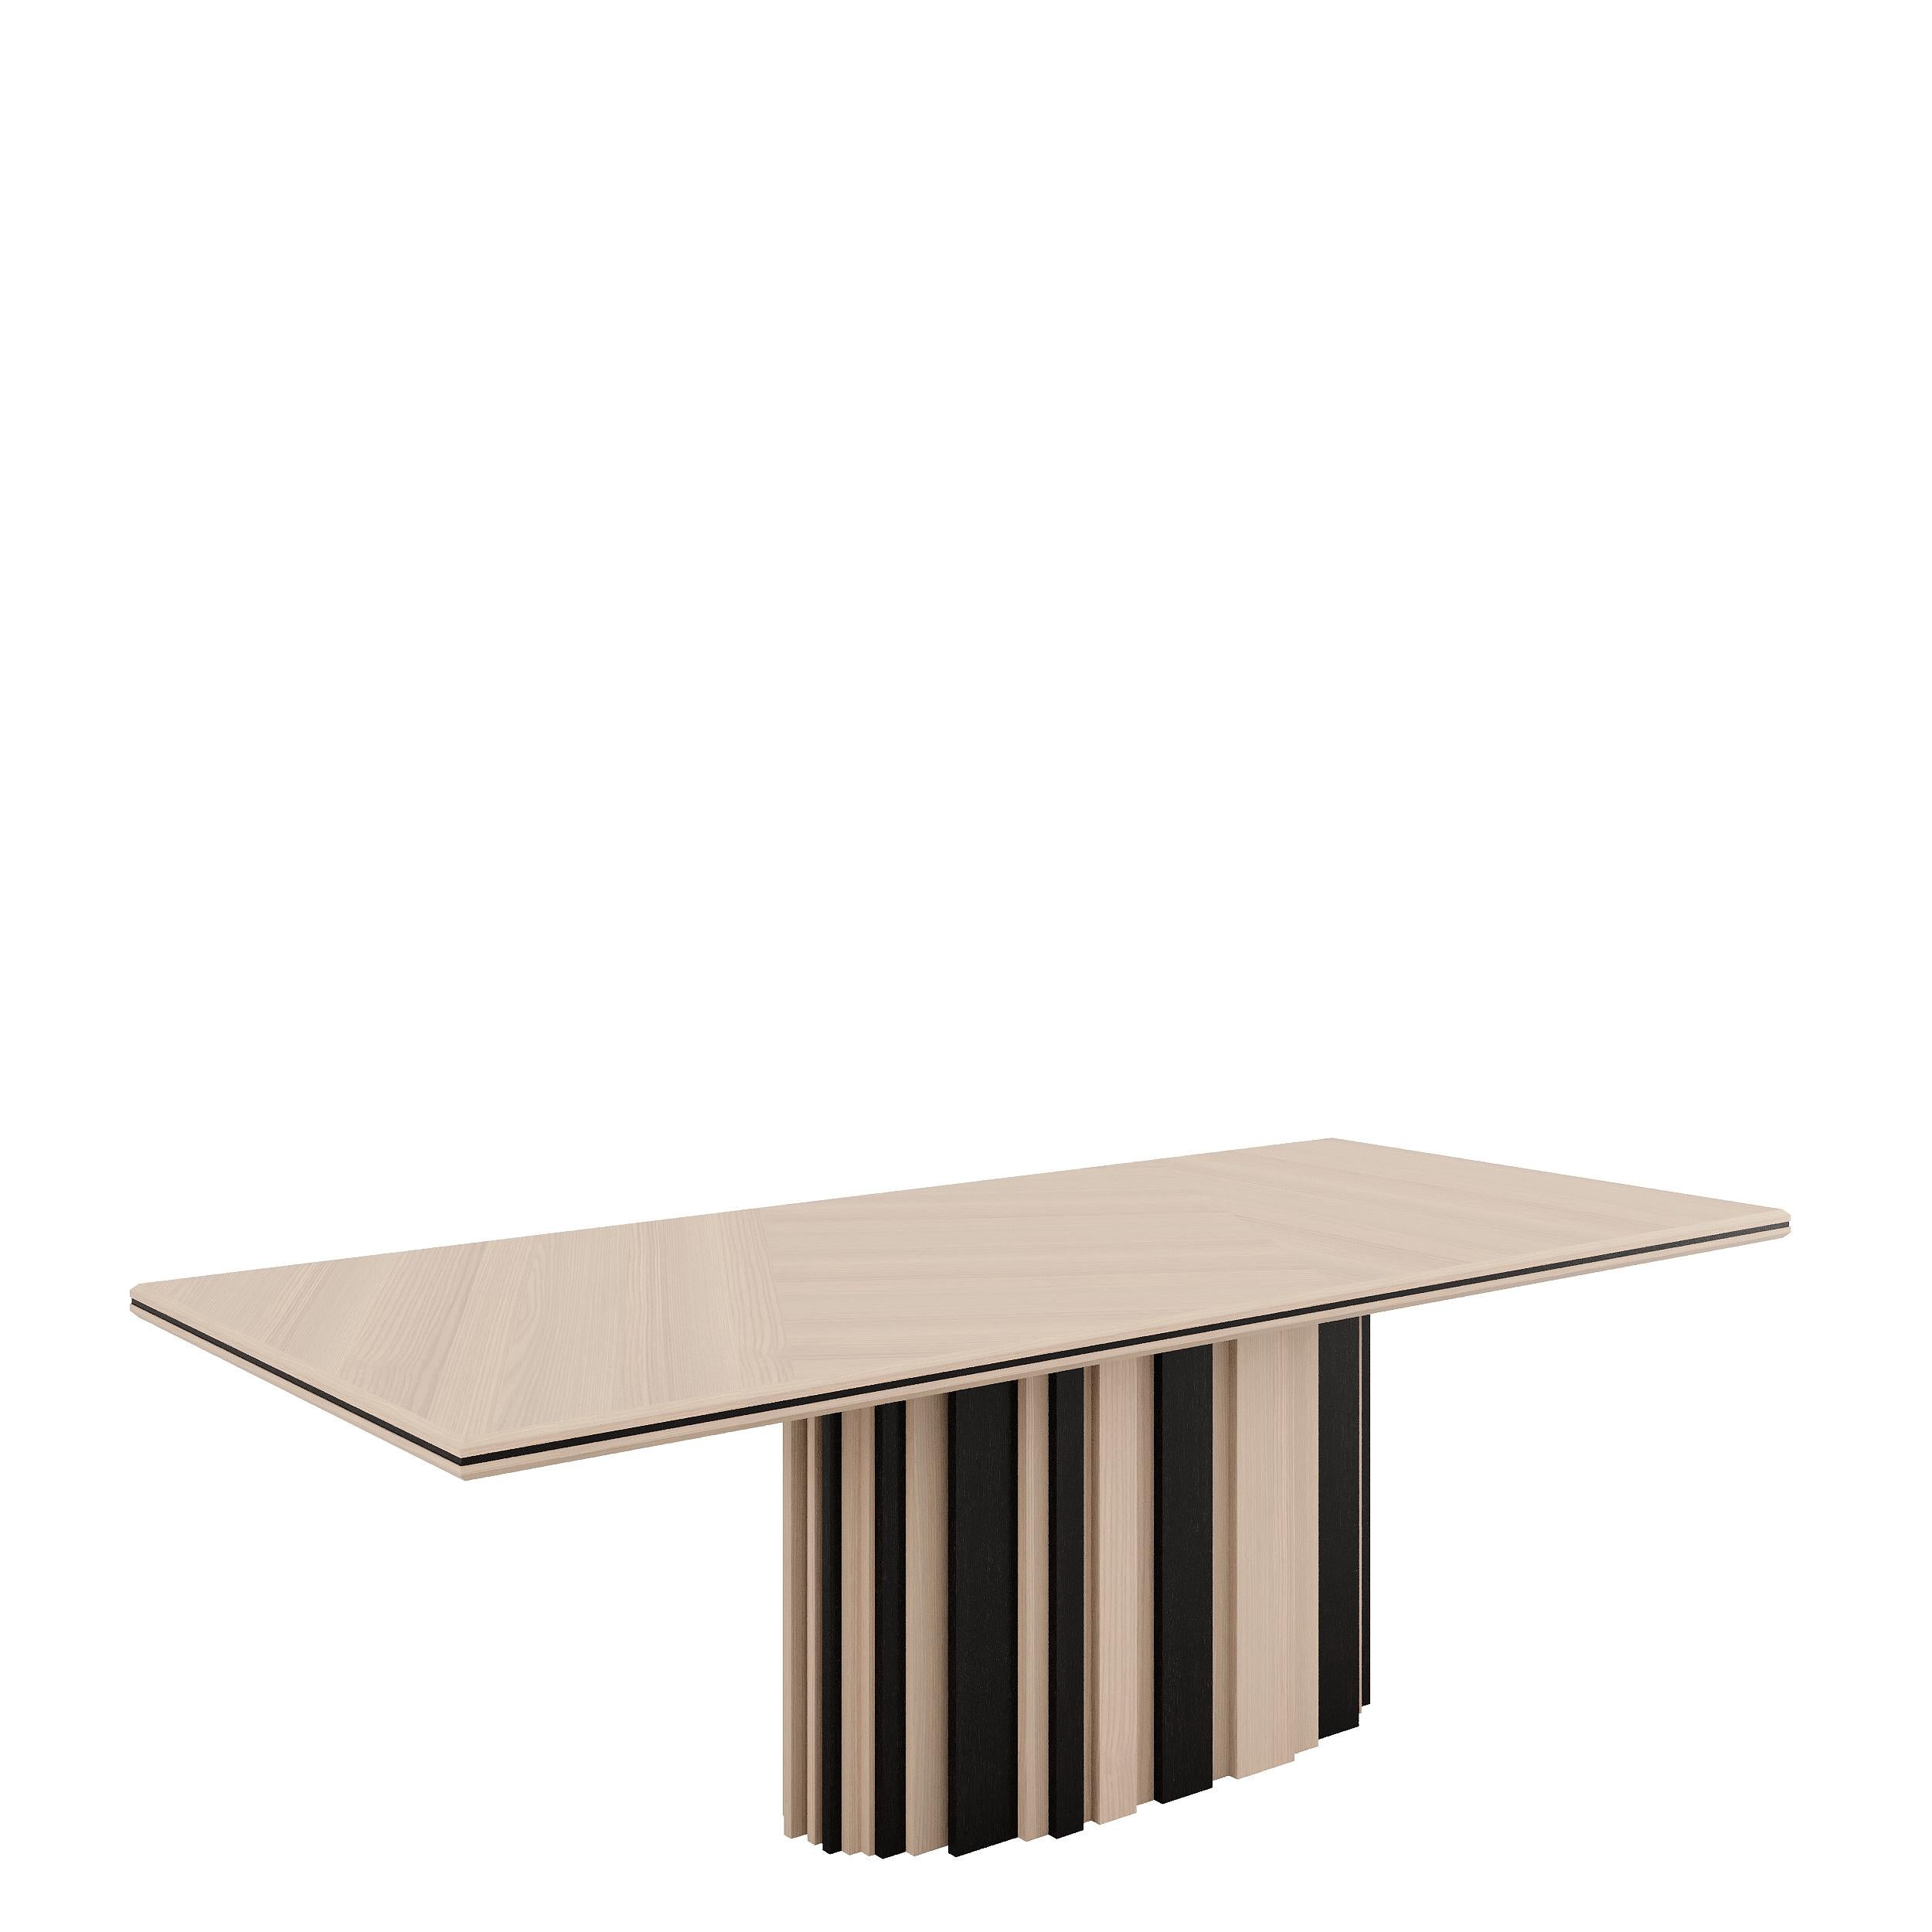 The BETSY dining table features a geometric simplicity, whose large top rests on the elongated central base, providing a complete stability and support at the table.Available in lacquer or veneered wood, Betsy even allows the combination of